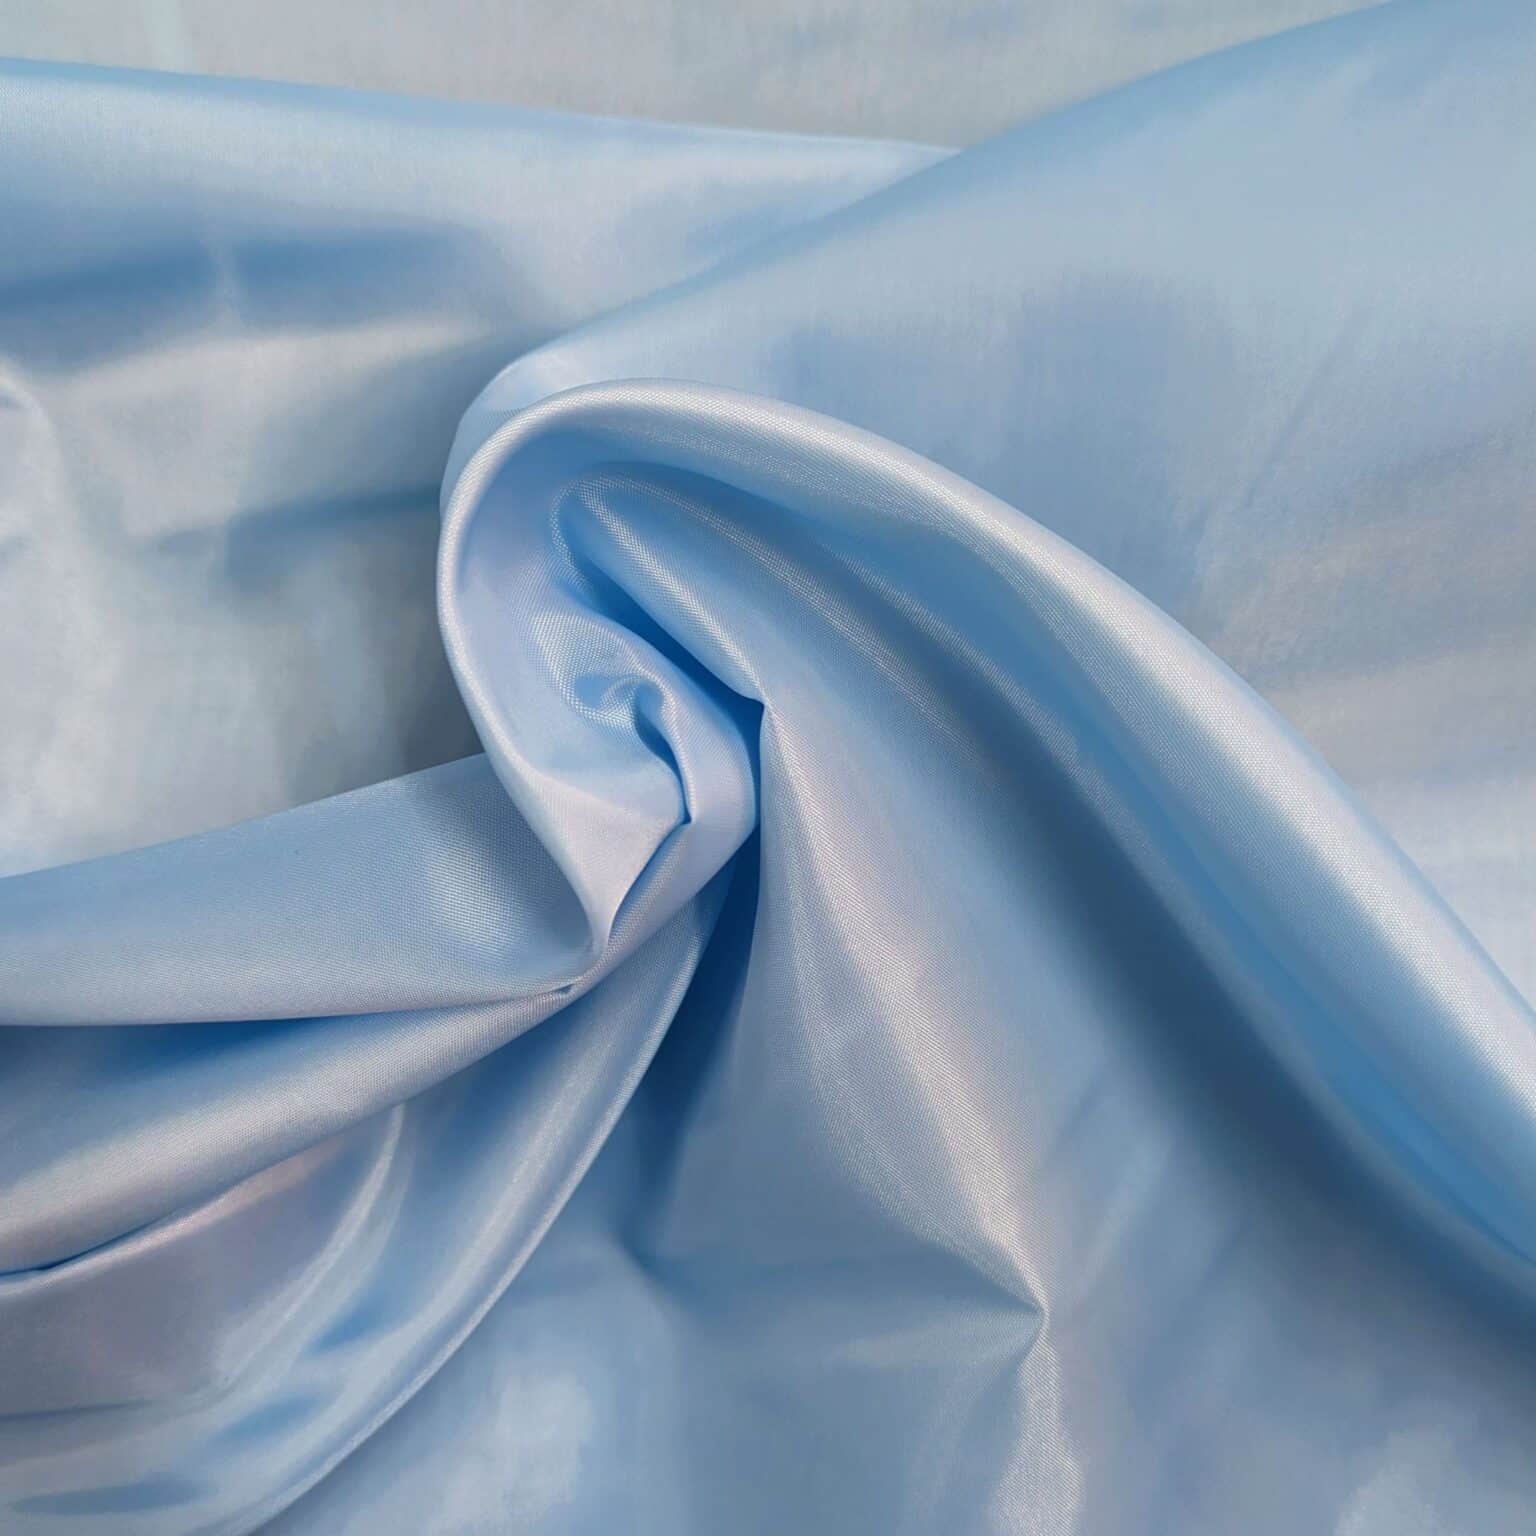 Blue polyester anti static lining fabric | More Sewing